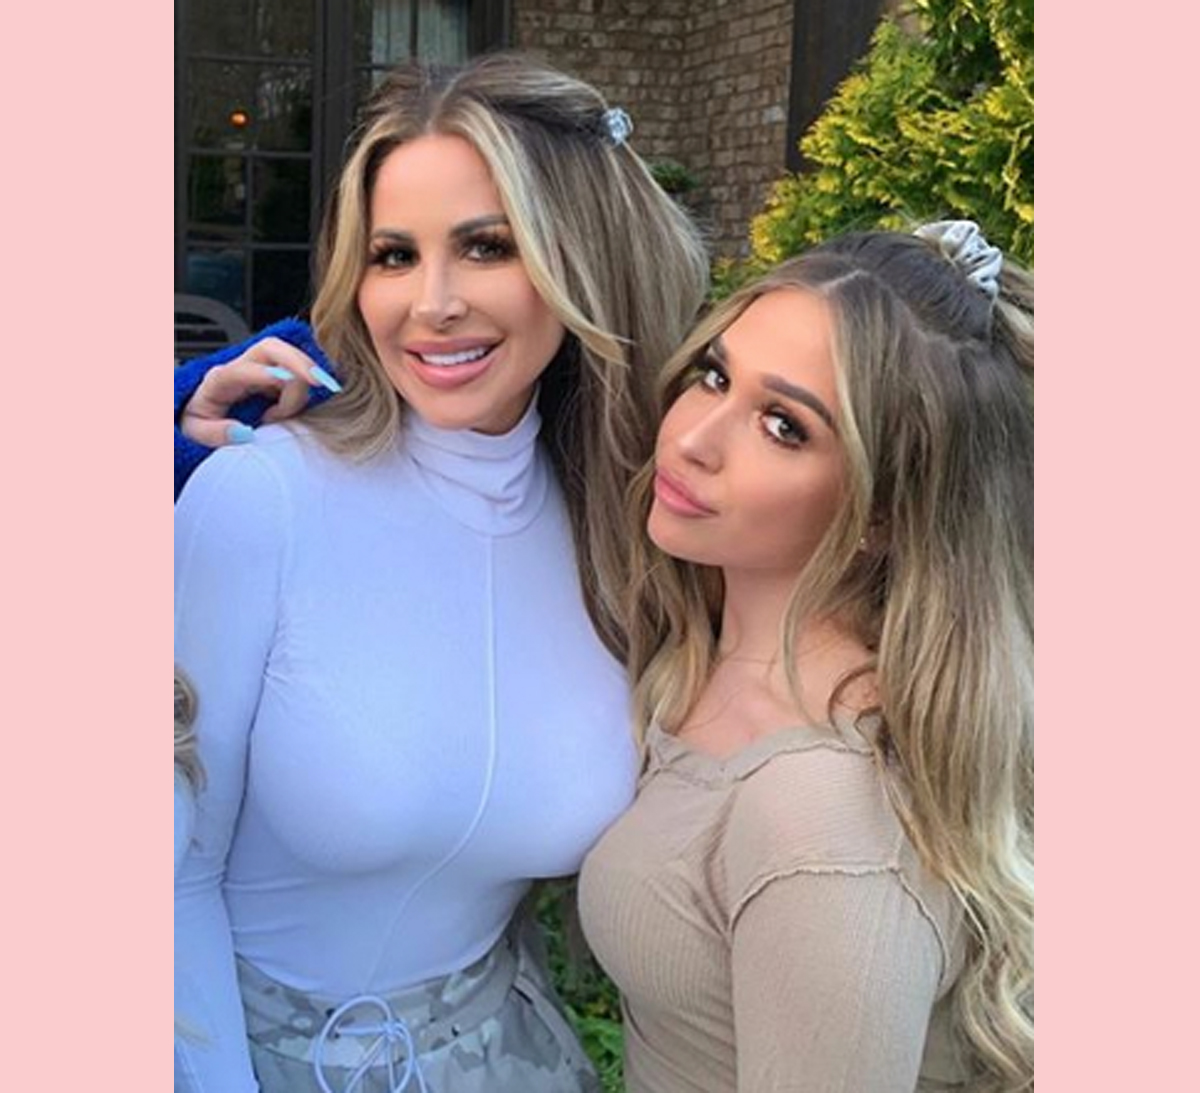 Ariana Biermann Rings In WILD 18th Birthday With A Stripper, Tattoos, Sex Toys, AND Her Parents!